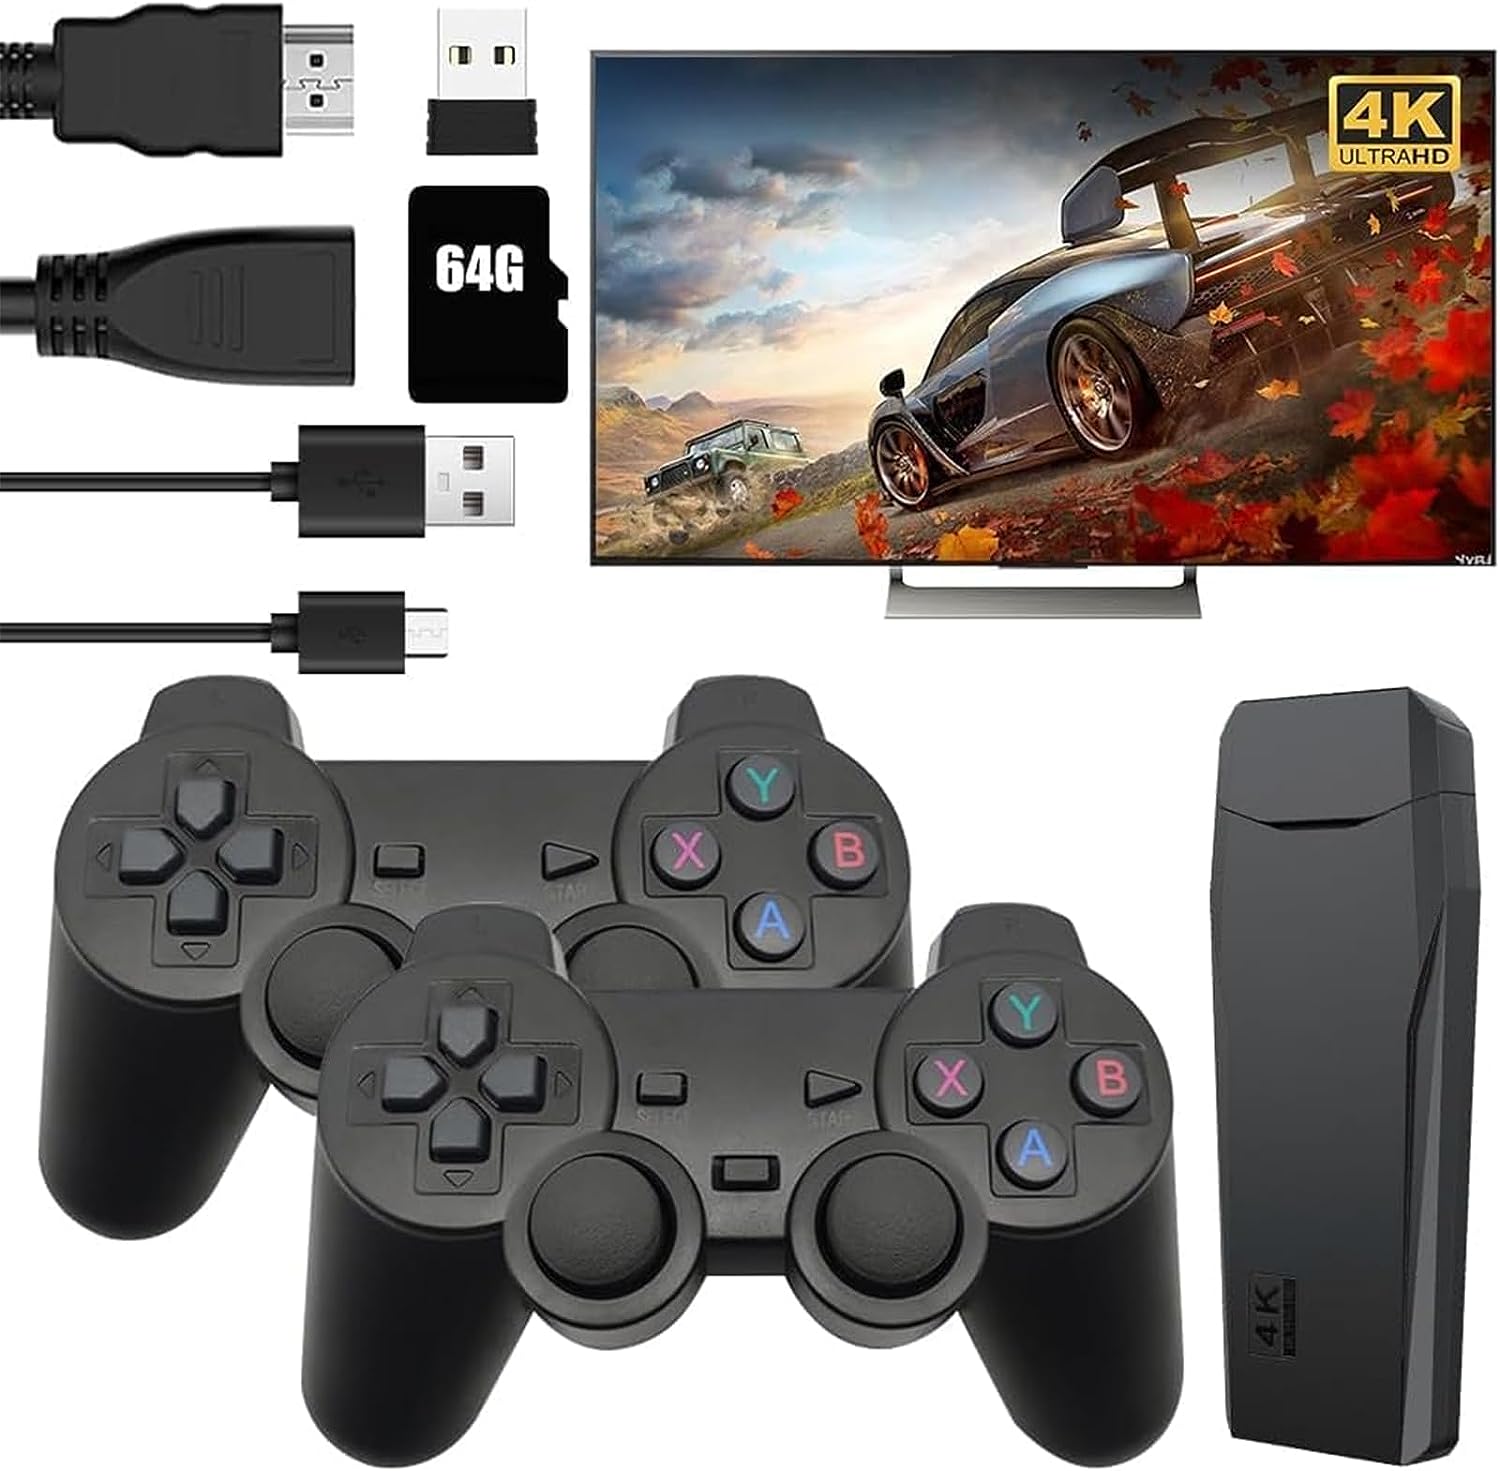 Wireless Retro Game Console,Retro play Game Stick,Nostalgia Stick Game,4K HDMI Output,Plug and Play Video Game Stick Built in 12000+ Games(64G)